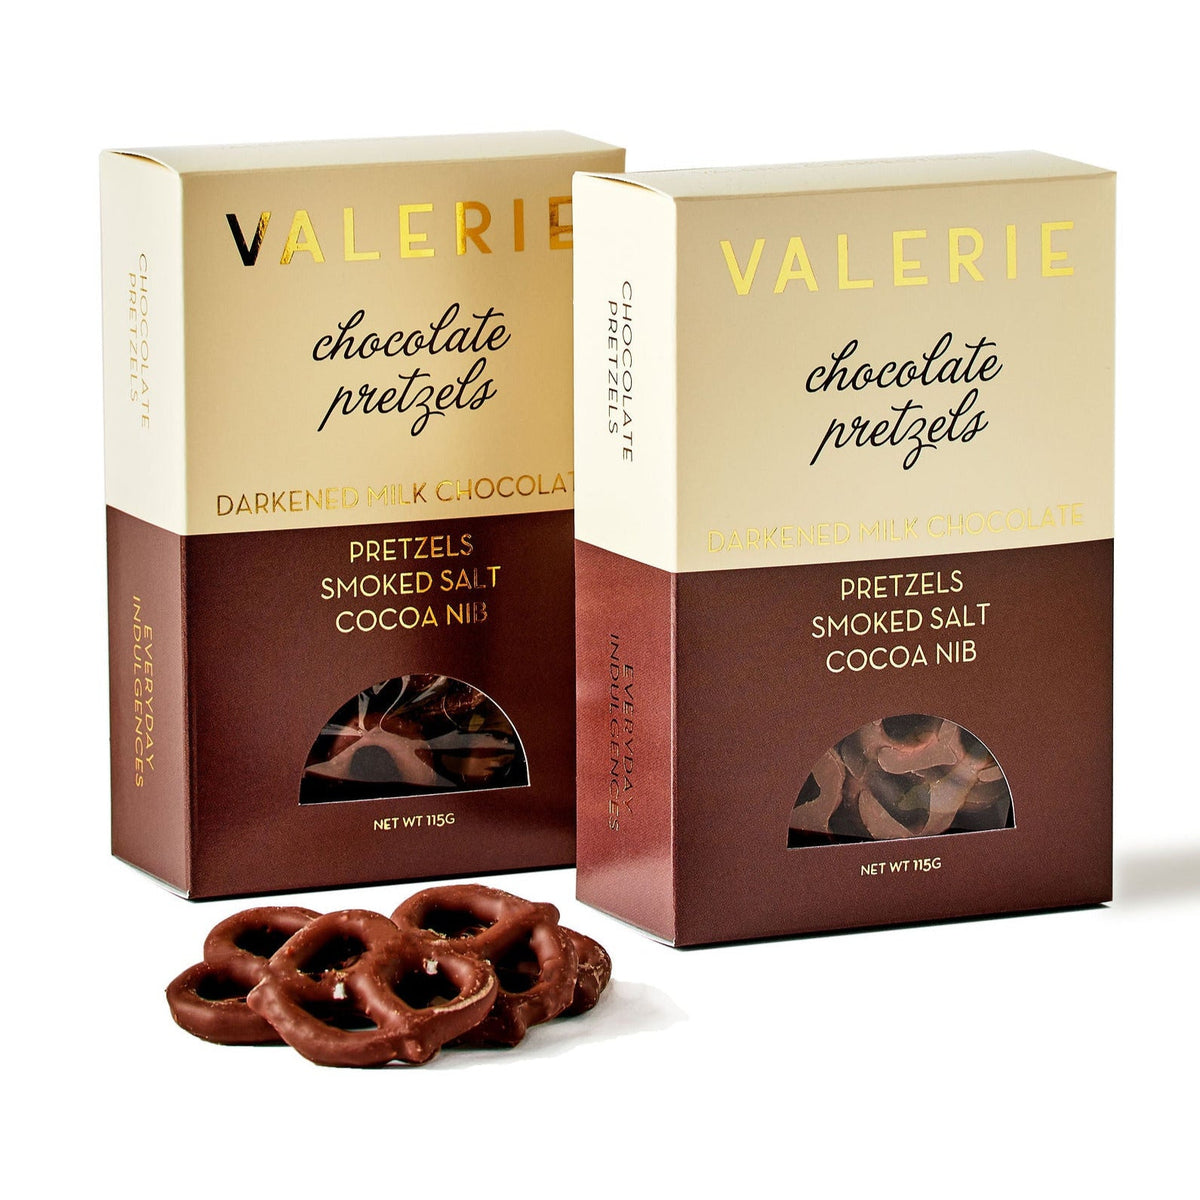 Two boxes of Valerie chocolate pretzels and handful of loose chocolate-covered pretzels.